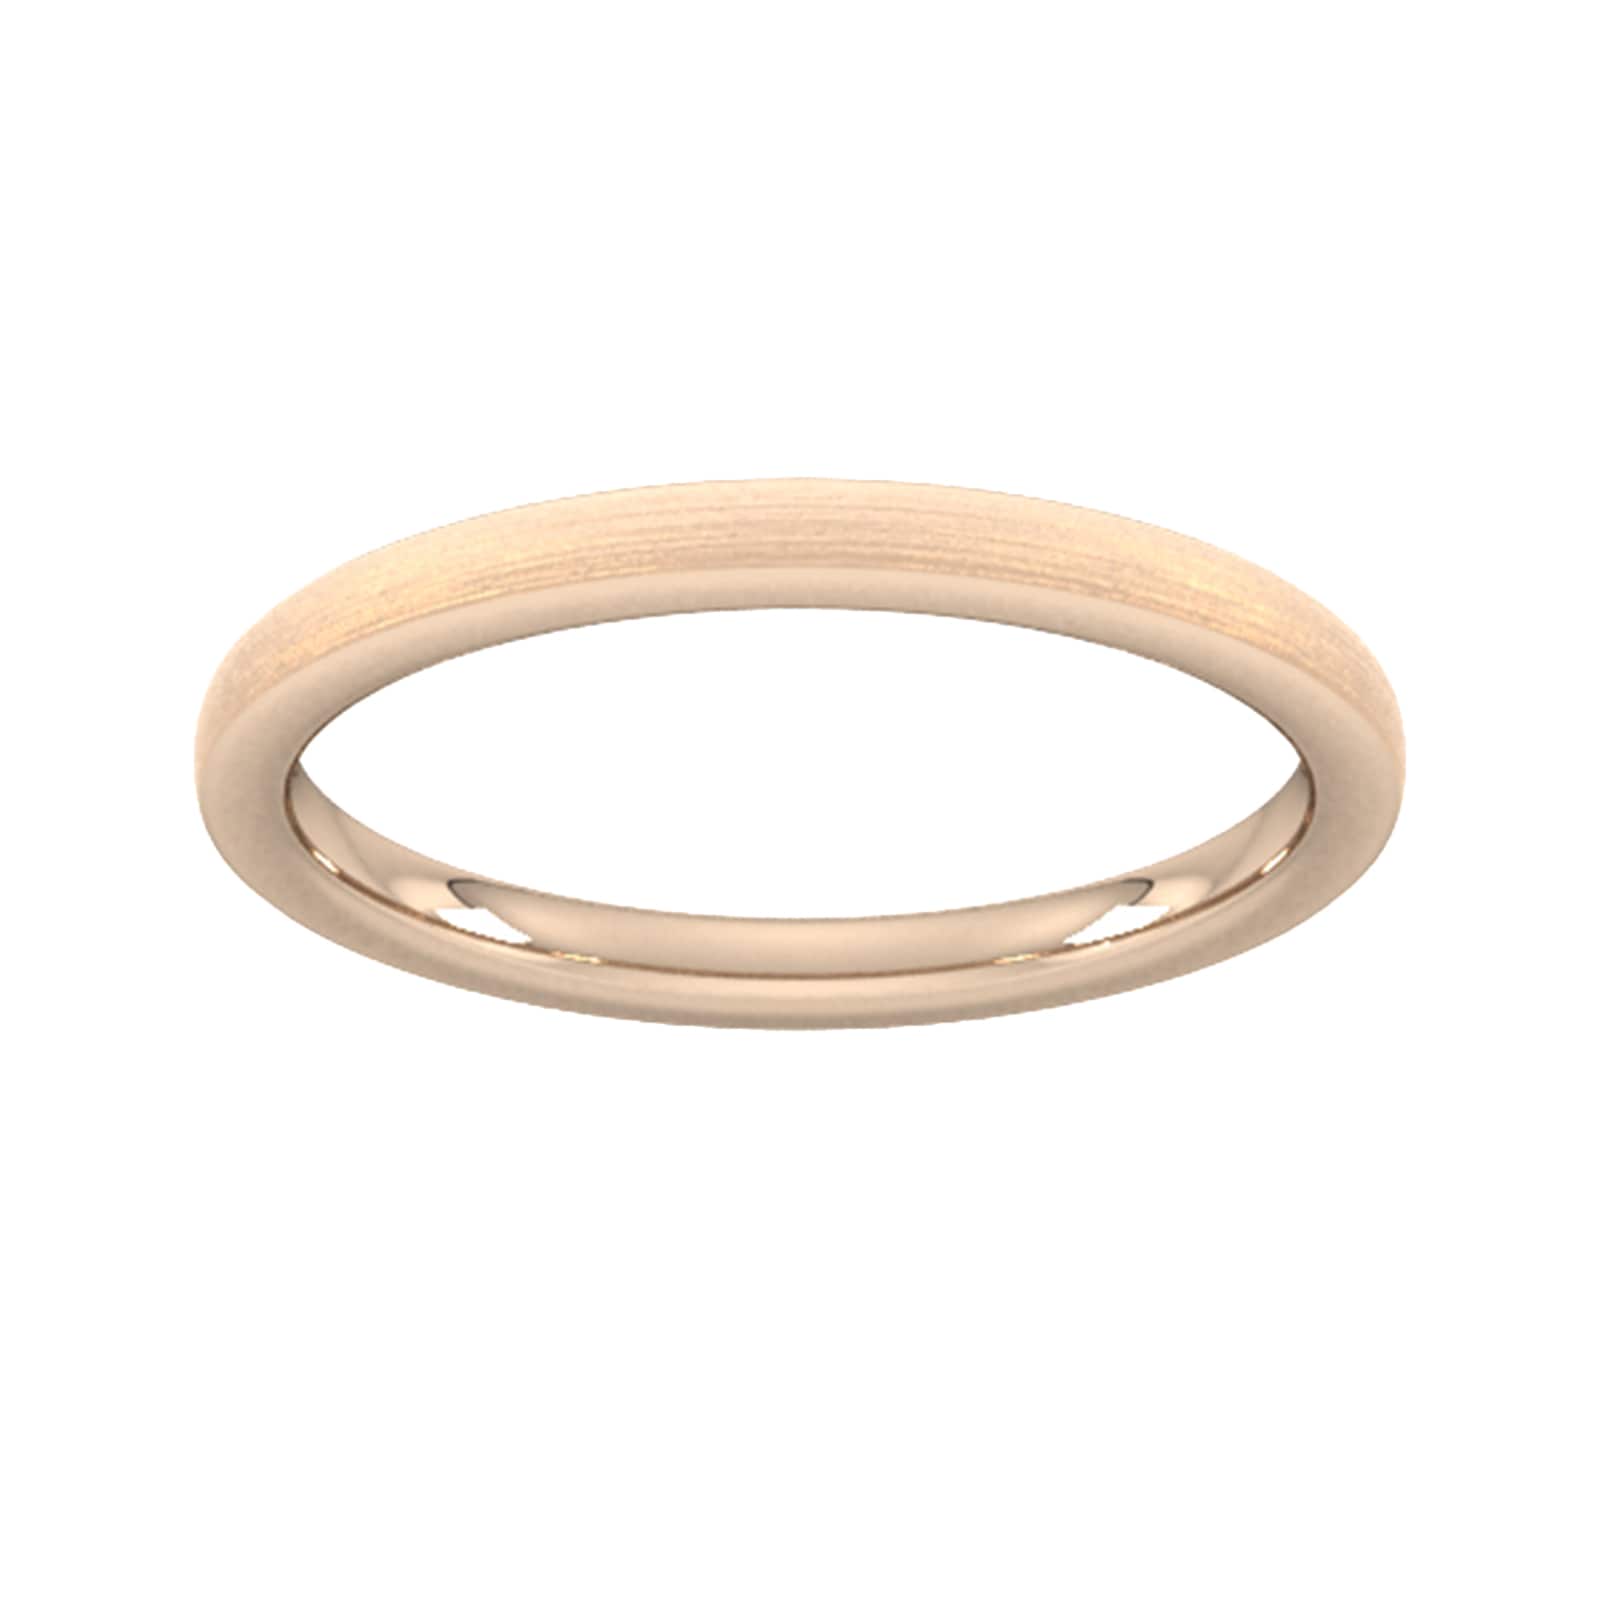 2mm D Shape Standard Polished Chamfered Edges With Matt Centre Wedding Ring In 9 Carat Rose Gold - Ring Size R